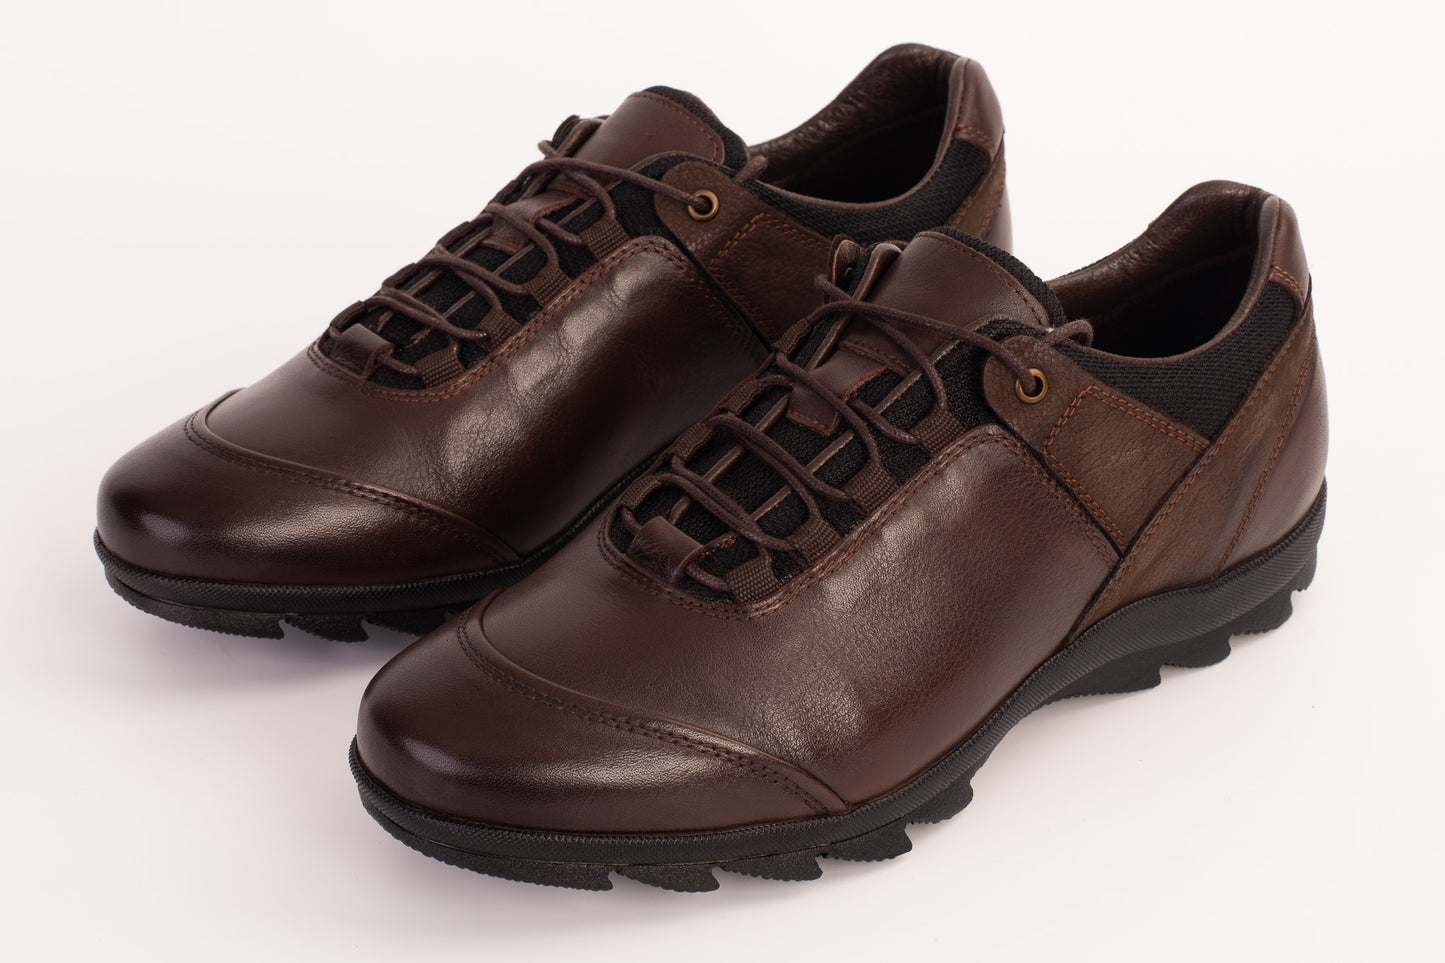 The Madrid Brown Leather Casual  Men Shoe